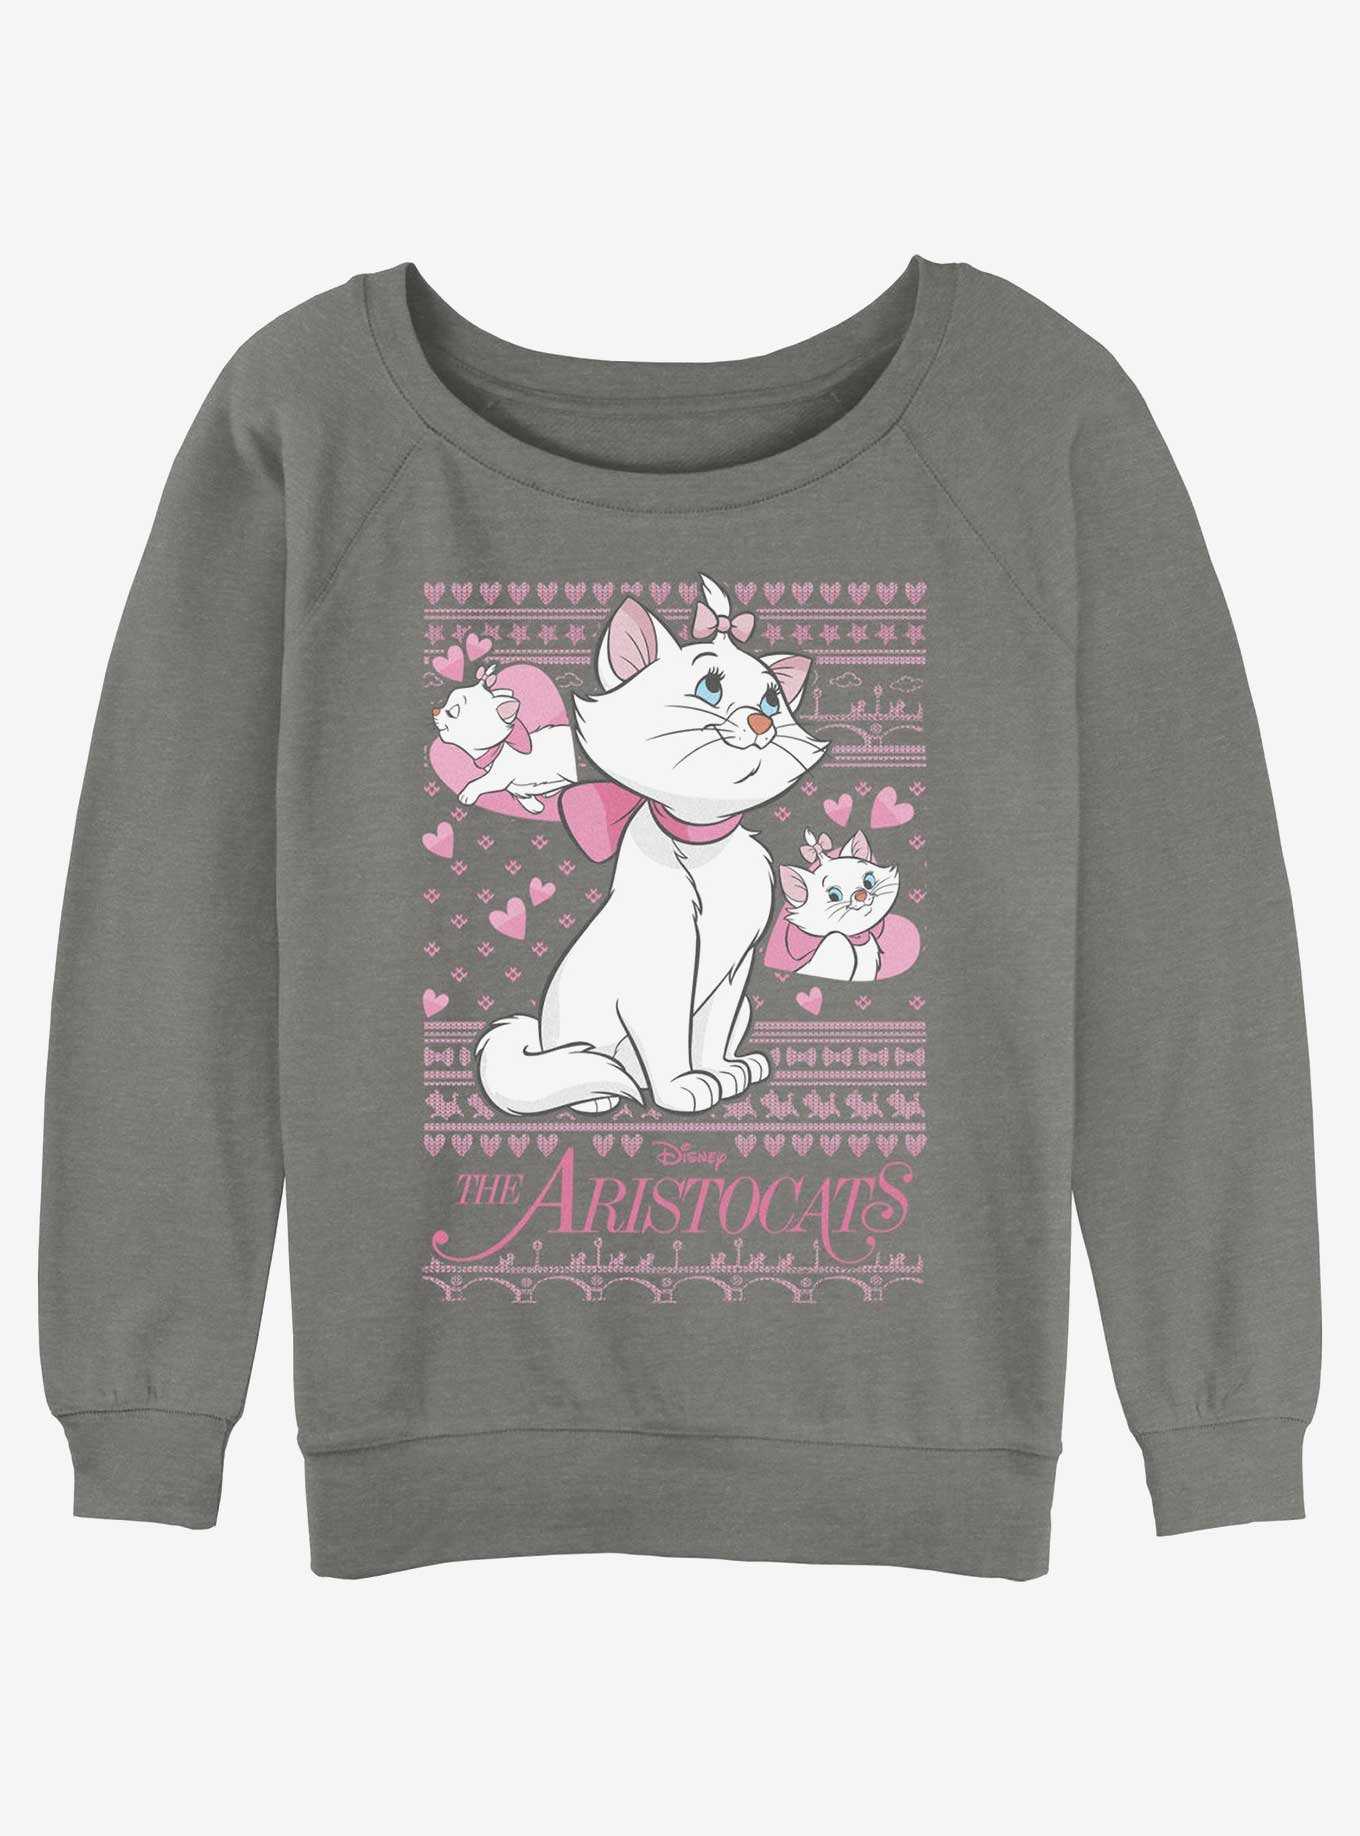 & Gifts Aristocats OFFICIAL Boxlunch | The Shirts, Merchandise